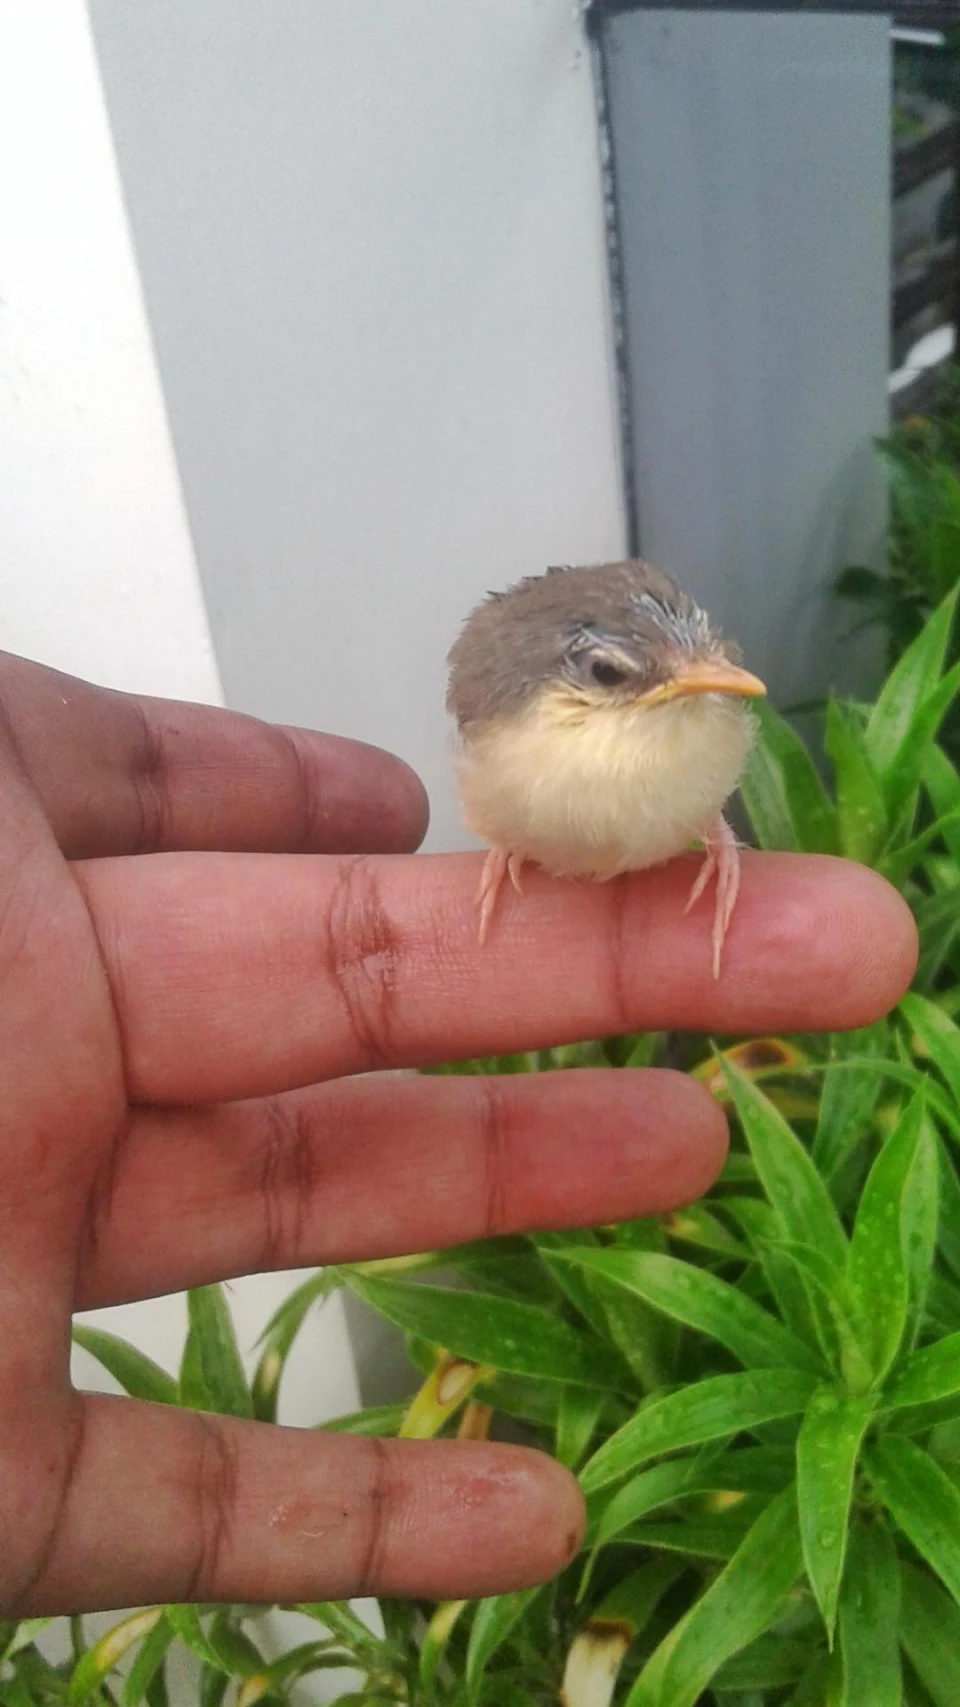 A fledgling perched comfortably on my finger.